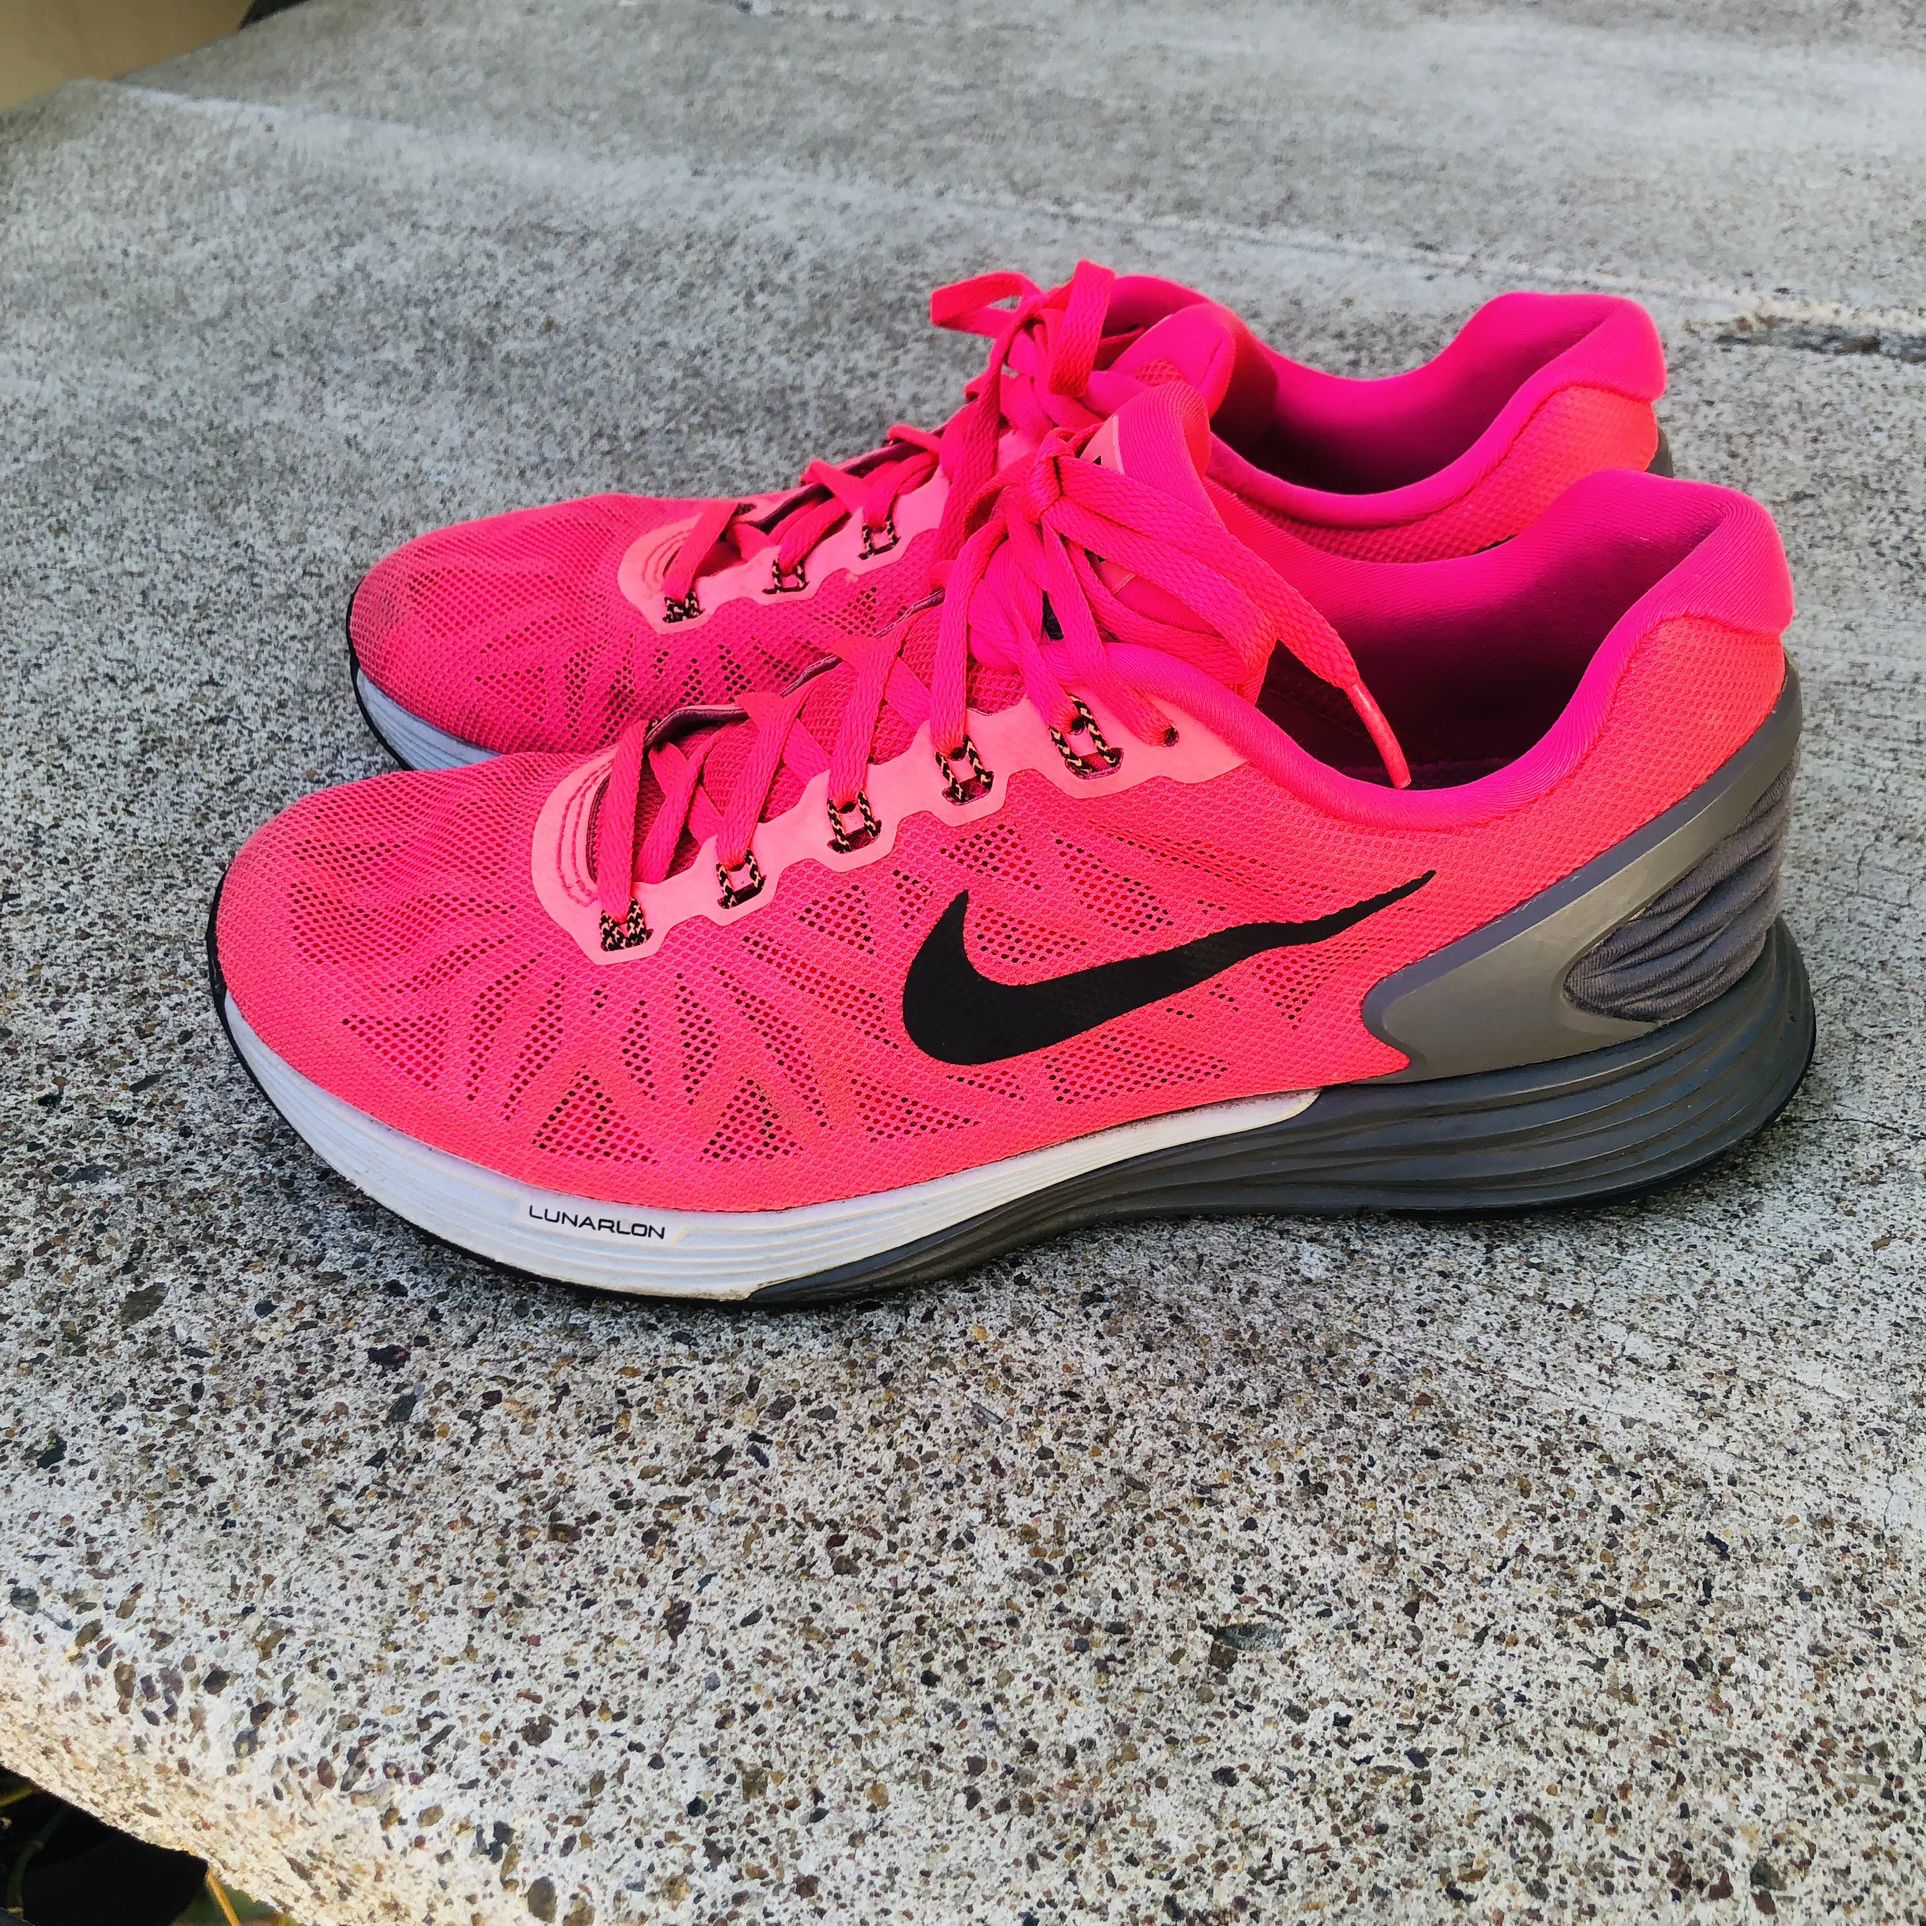 NIKE Lunarglide Women Running Sale in Lincoln Acres, CA - OfferUp